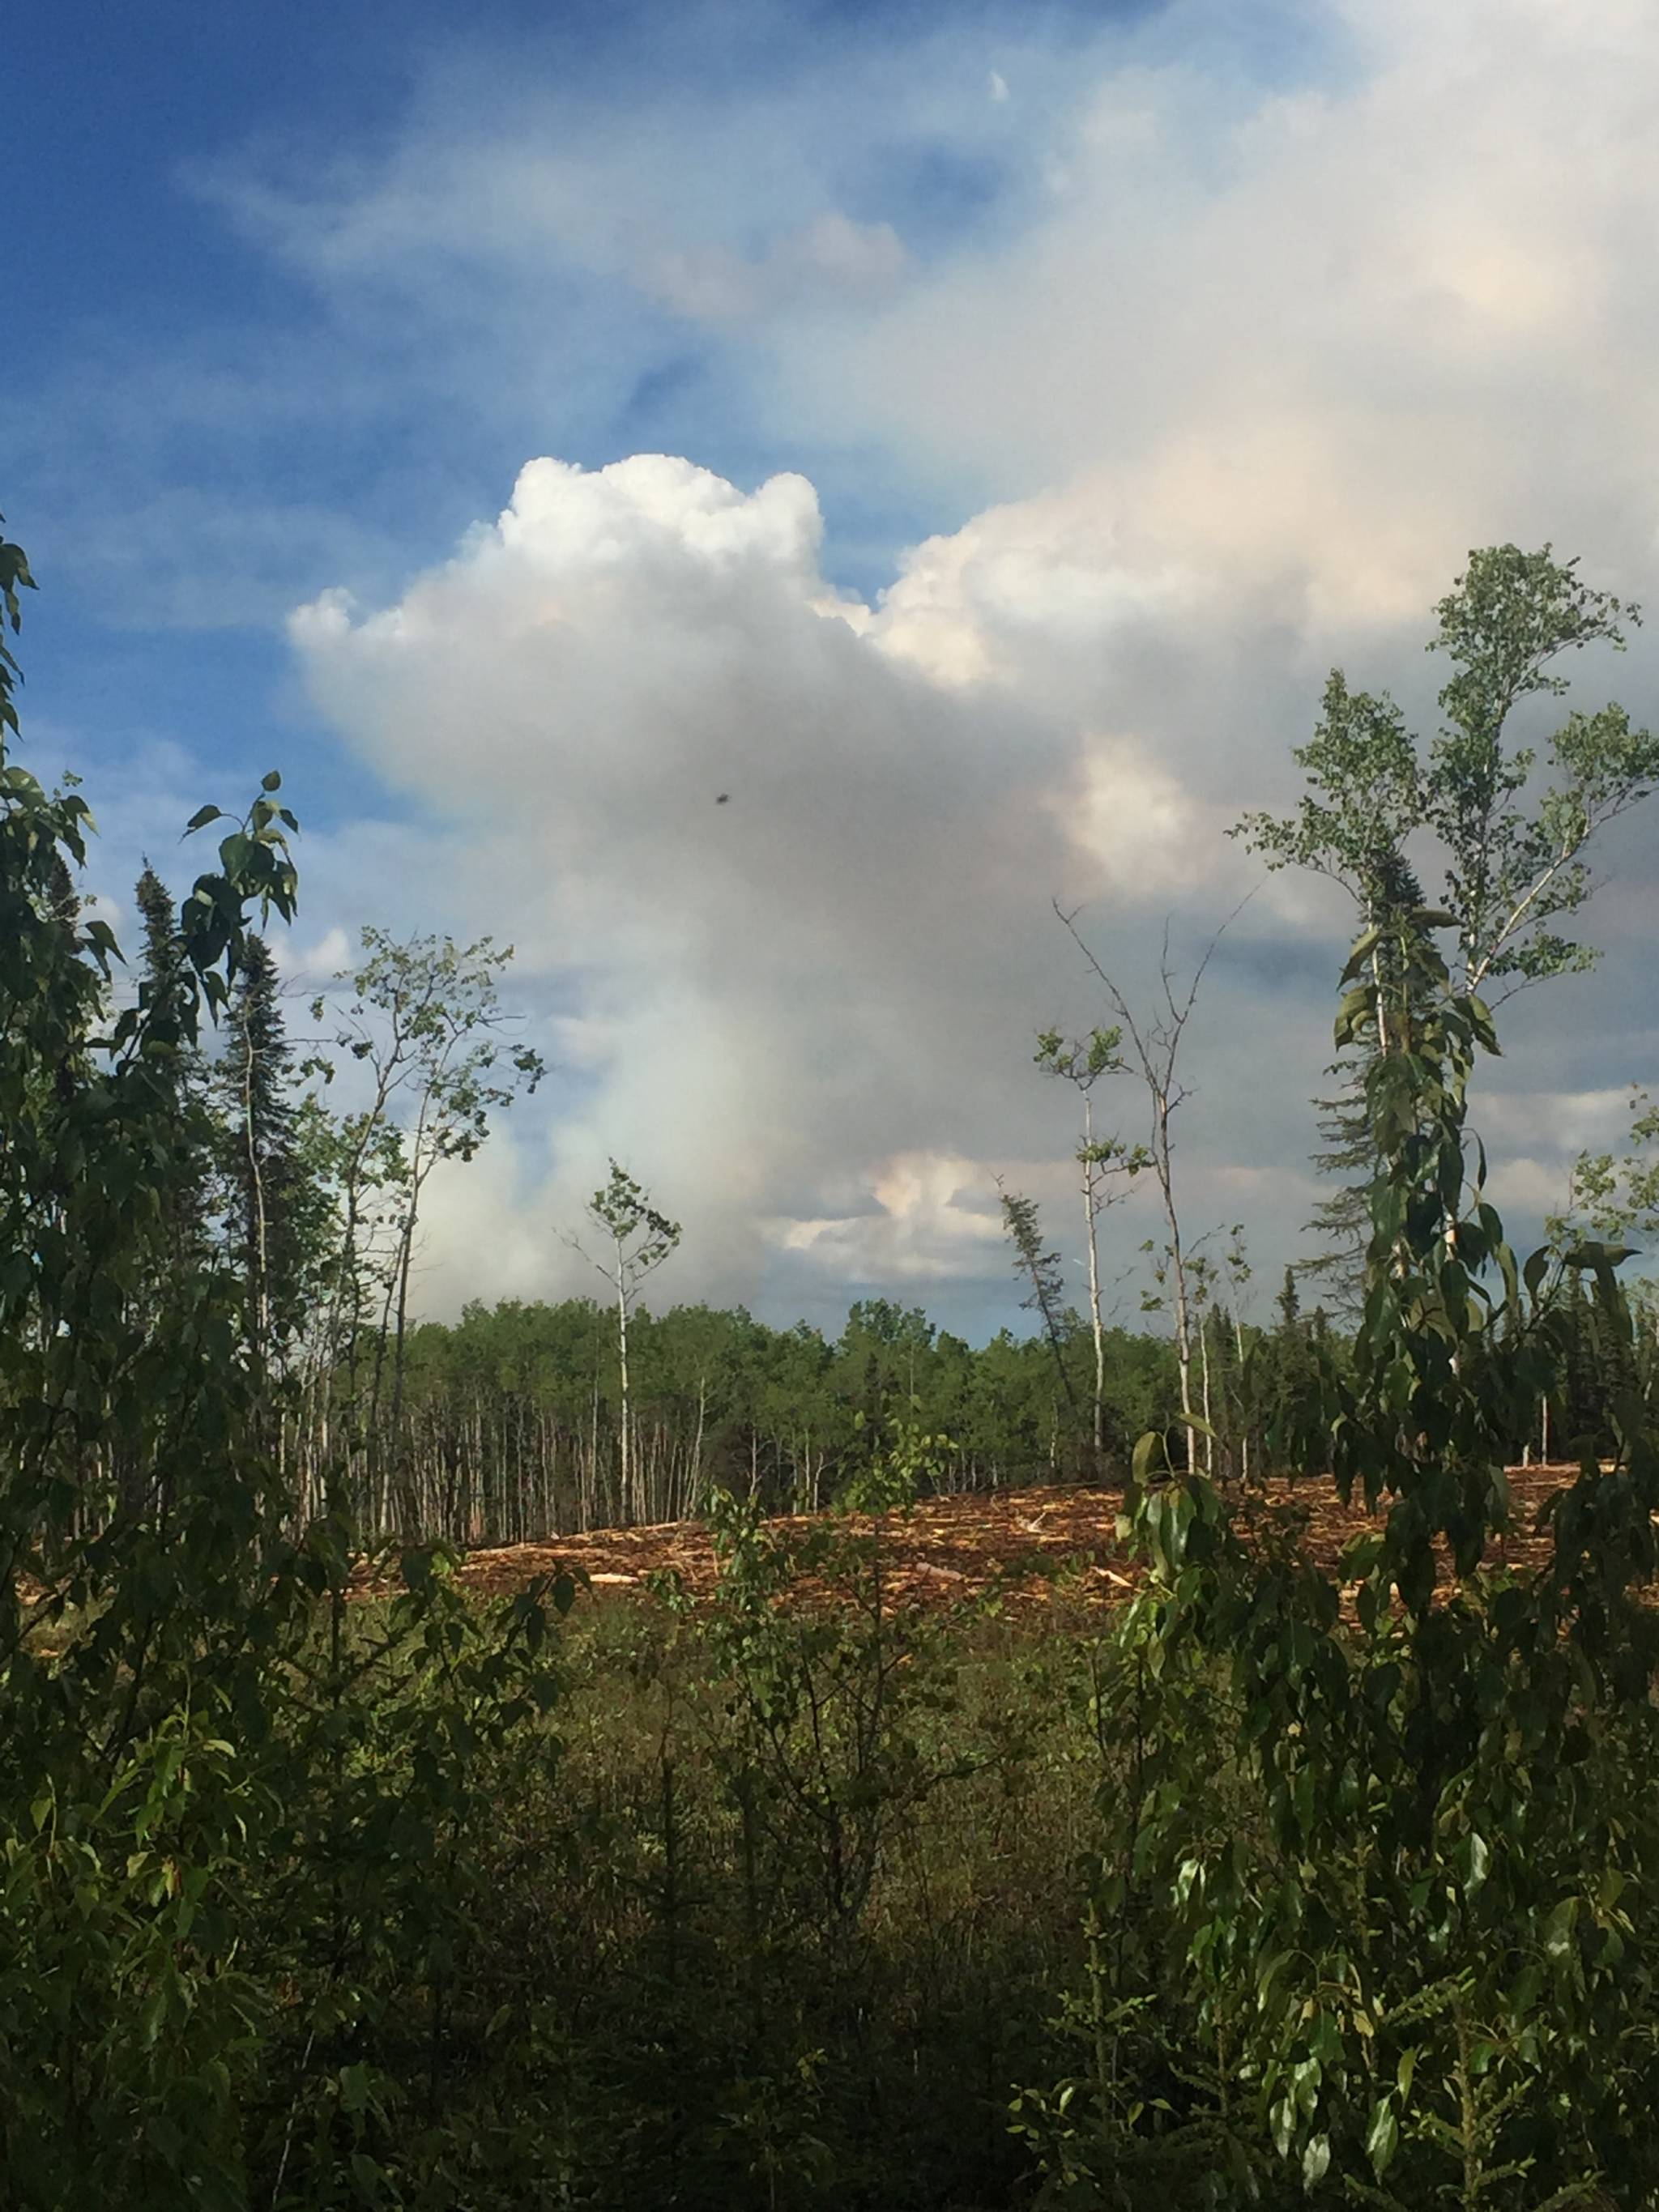 Smoke rises above the trees about a mile from Three Johns Road in Sterling Thursday evening. Firefighters are responding to a fire, believed to have been caused by a lightning strike, near Mile 76 of the Sterling Highway. (Photo by Megan Pacer/Peninsula Clarion)